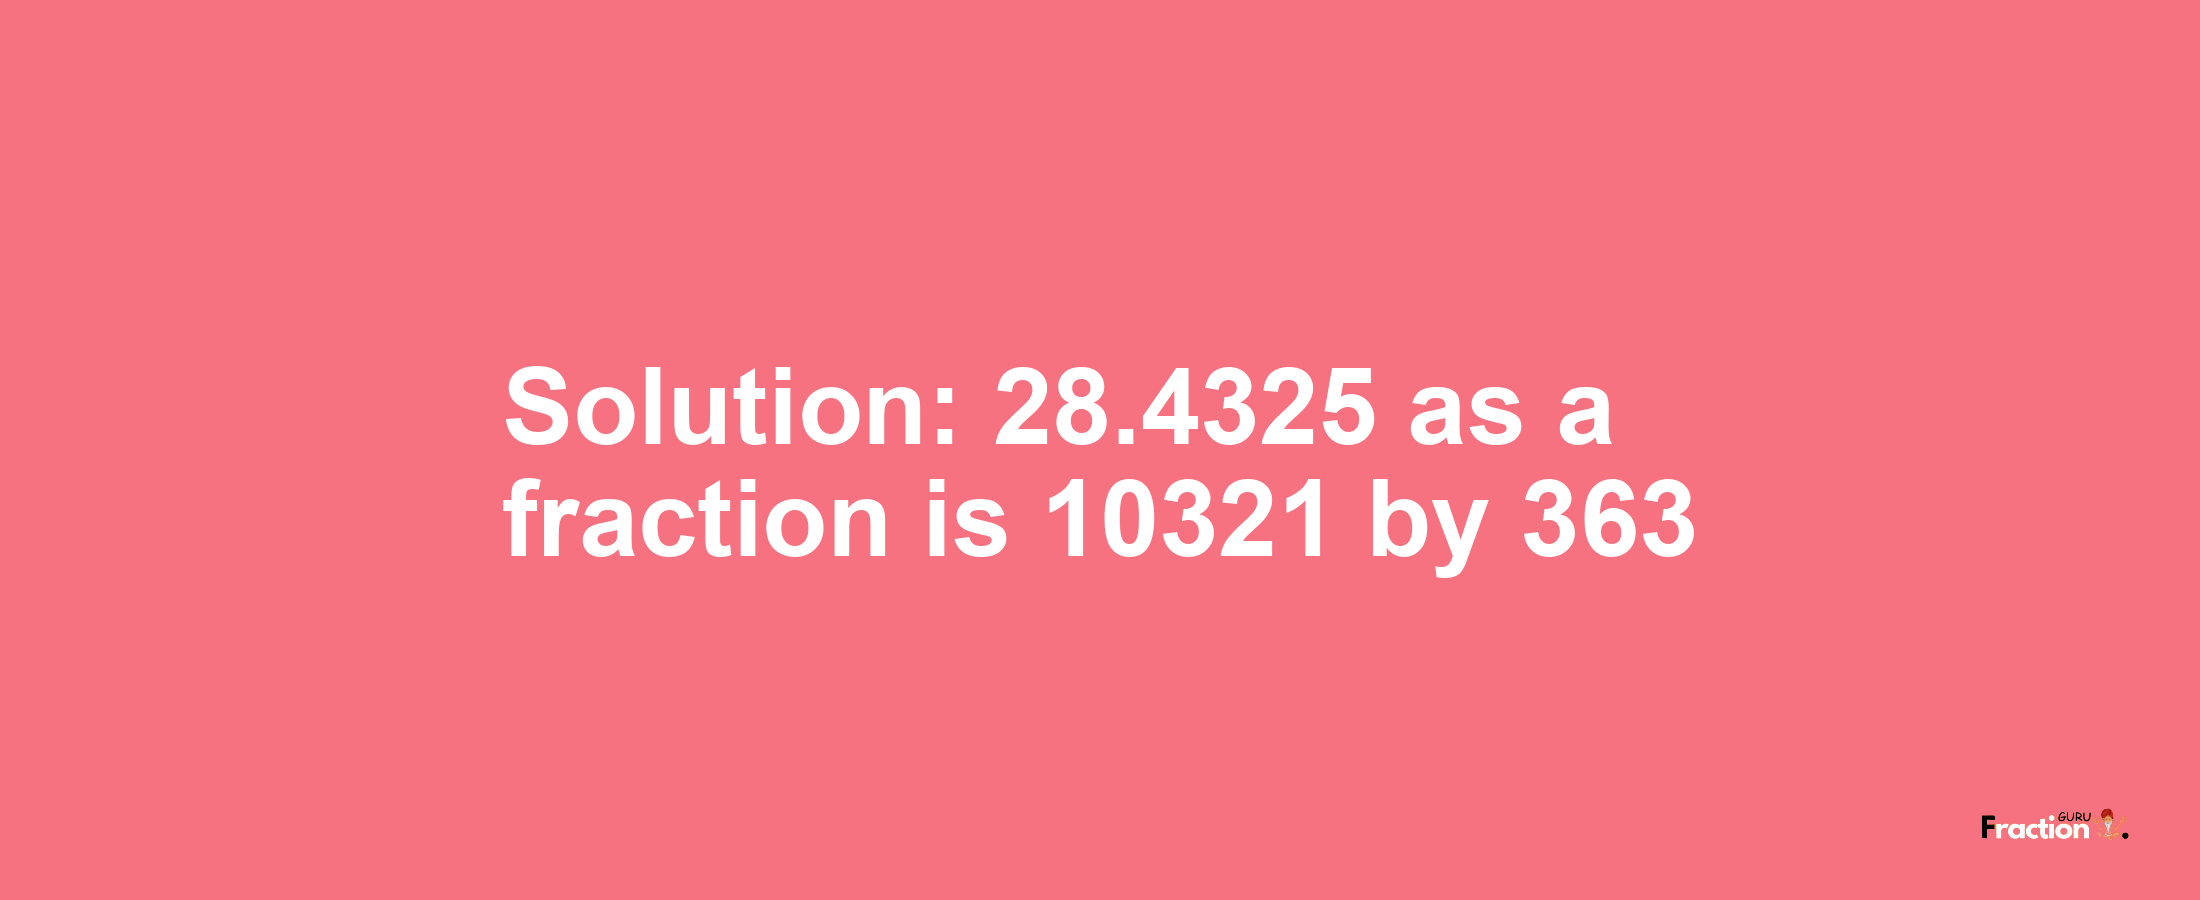 Solution:28.4325 as a fraction is 10321/363